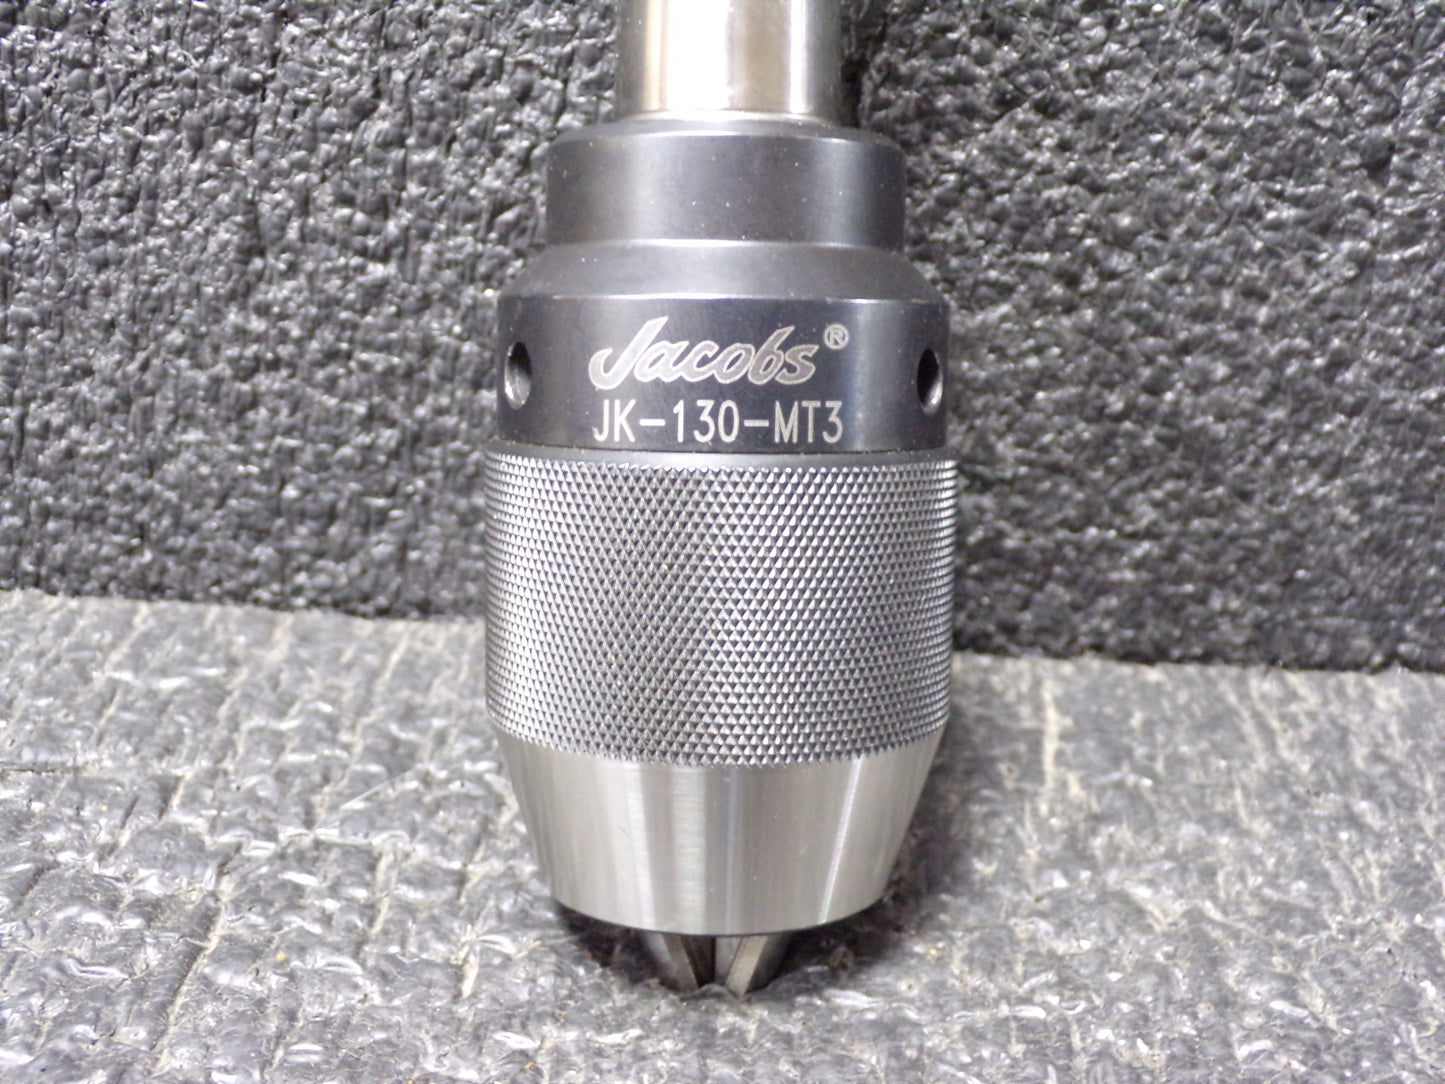 JACOBS Drill Chuck, For CNC Machines, Morse Taper, Mounting Size MT3, Max. Drill Capacity 0.5120 in (CR00267-BT02)